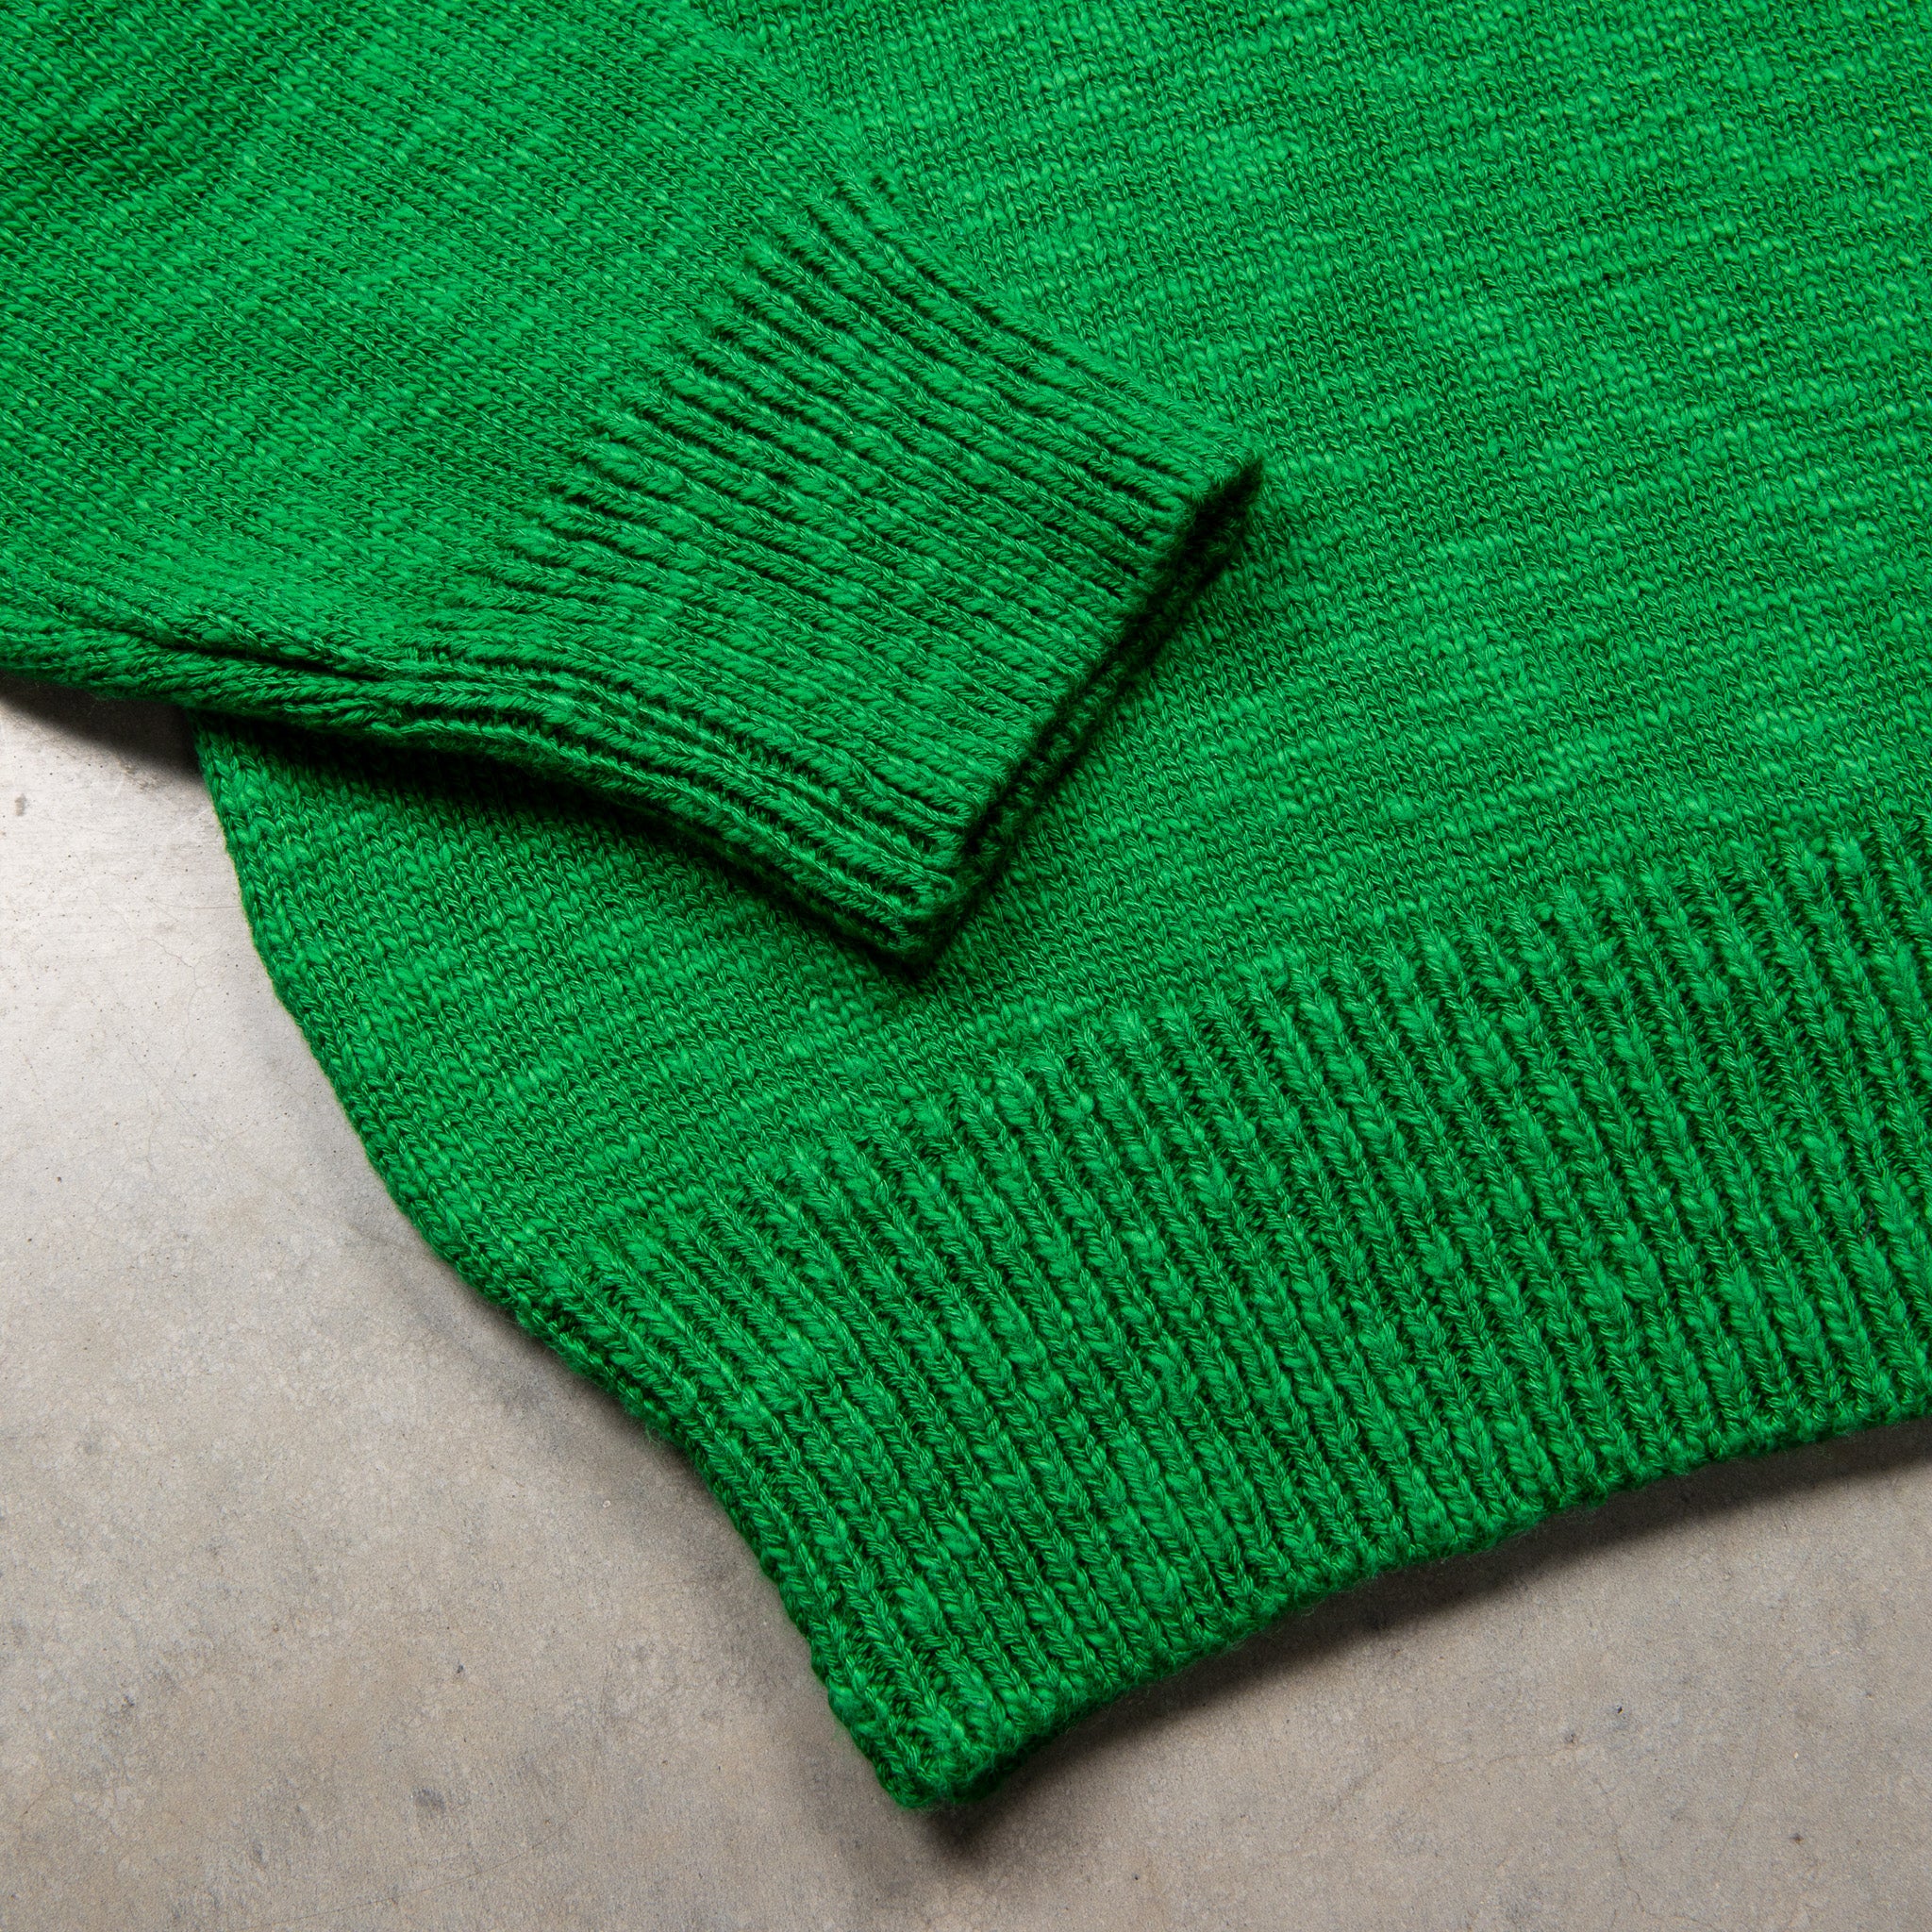 The Real McCoy&#39;s Summer Sweater Crew Neck Green